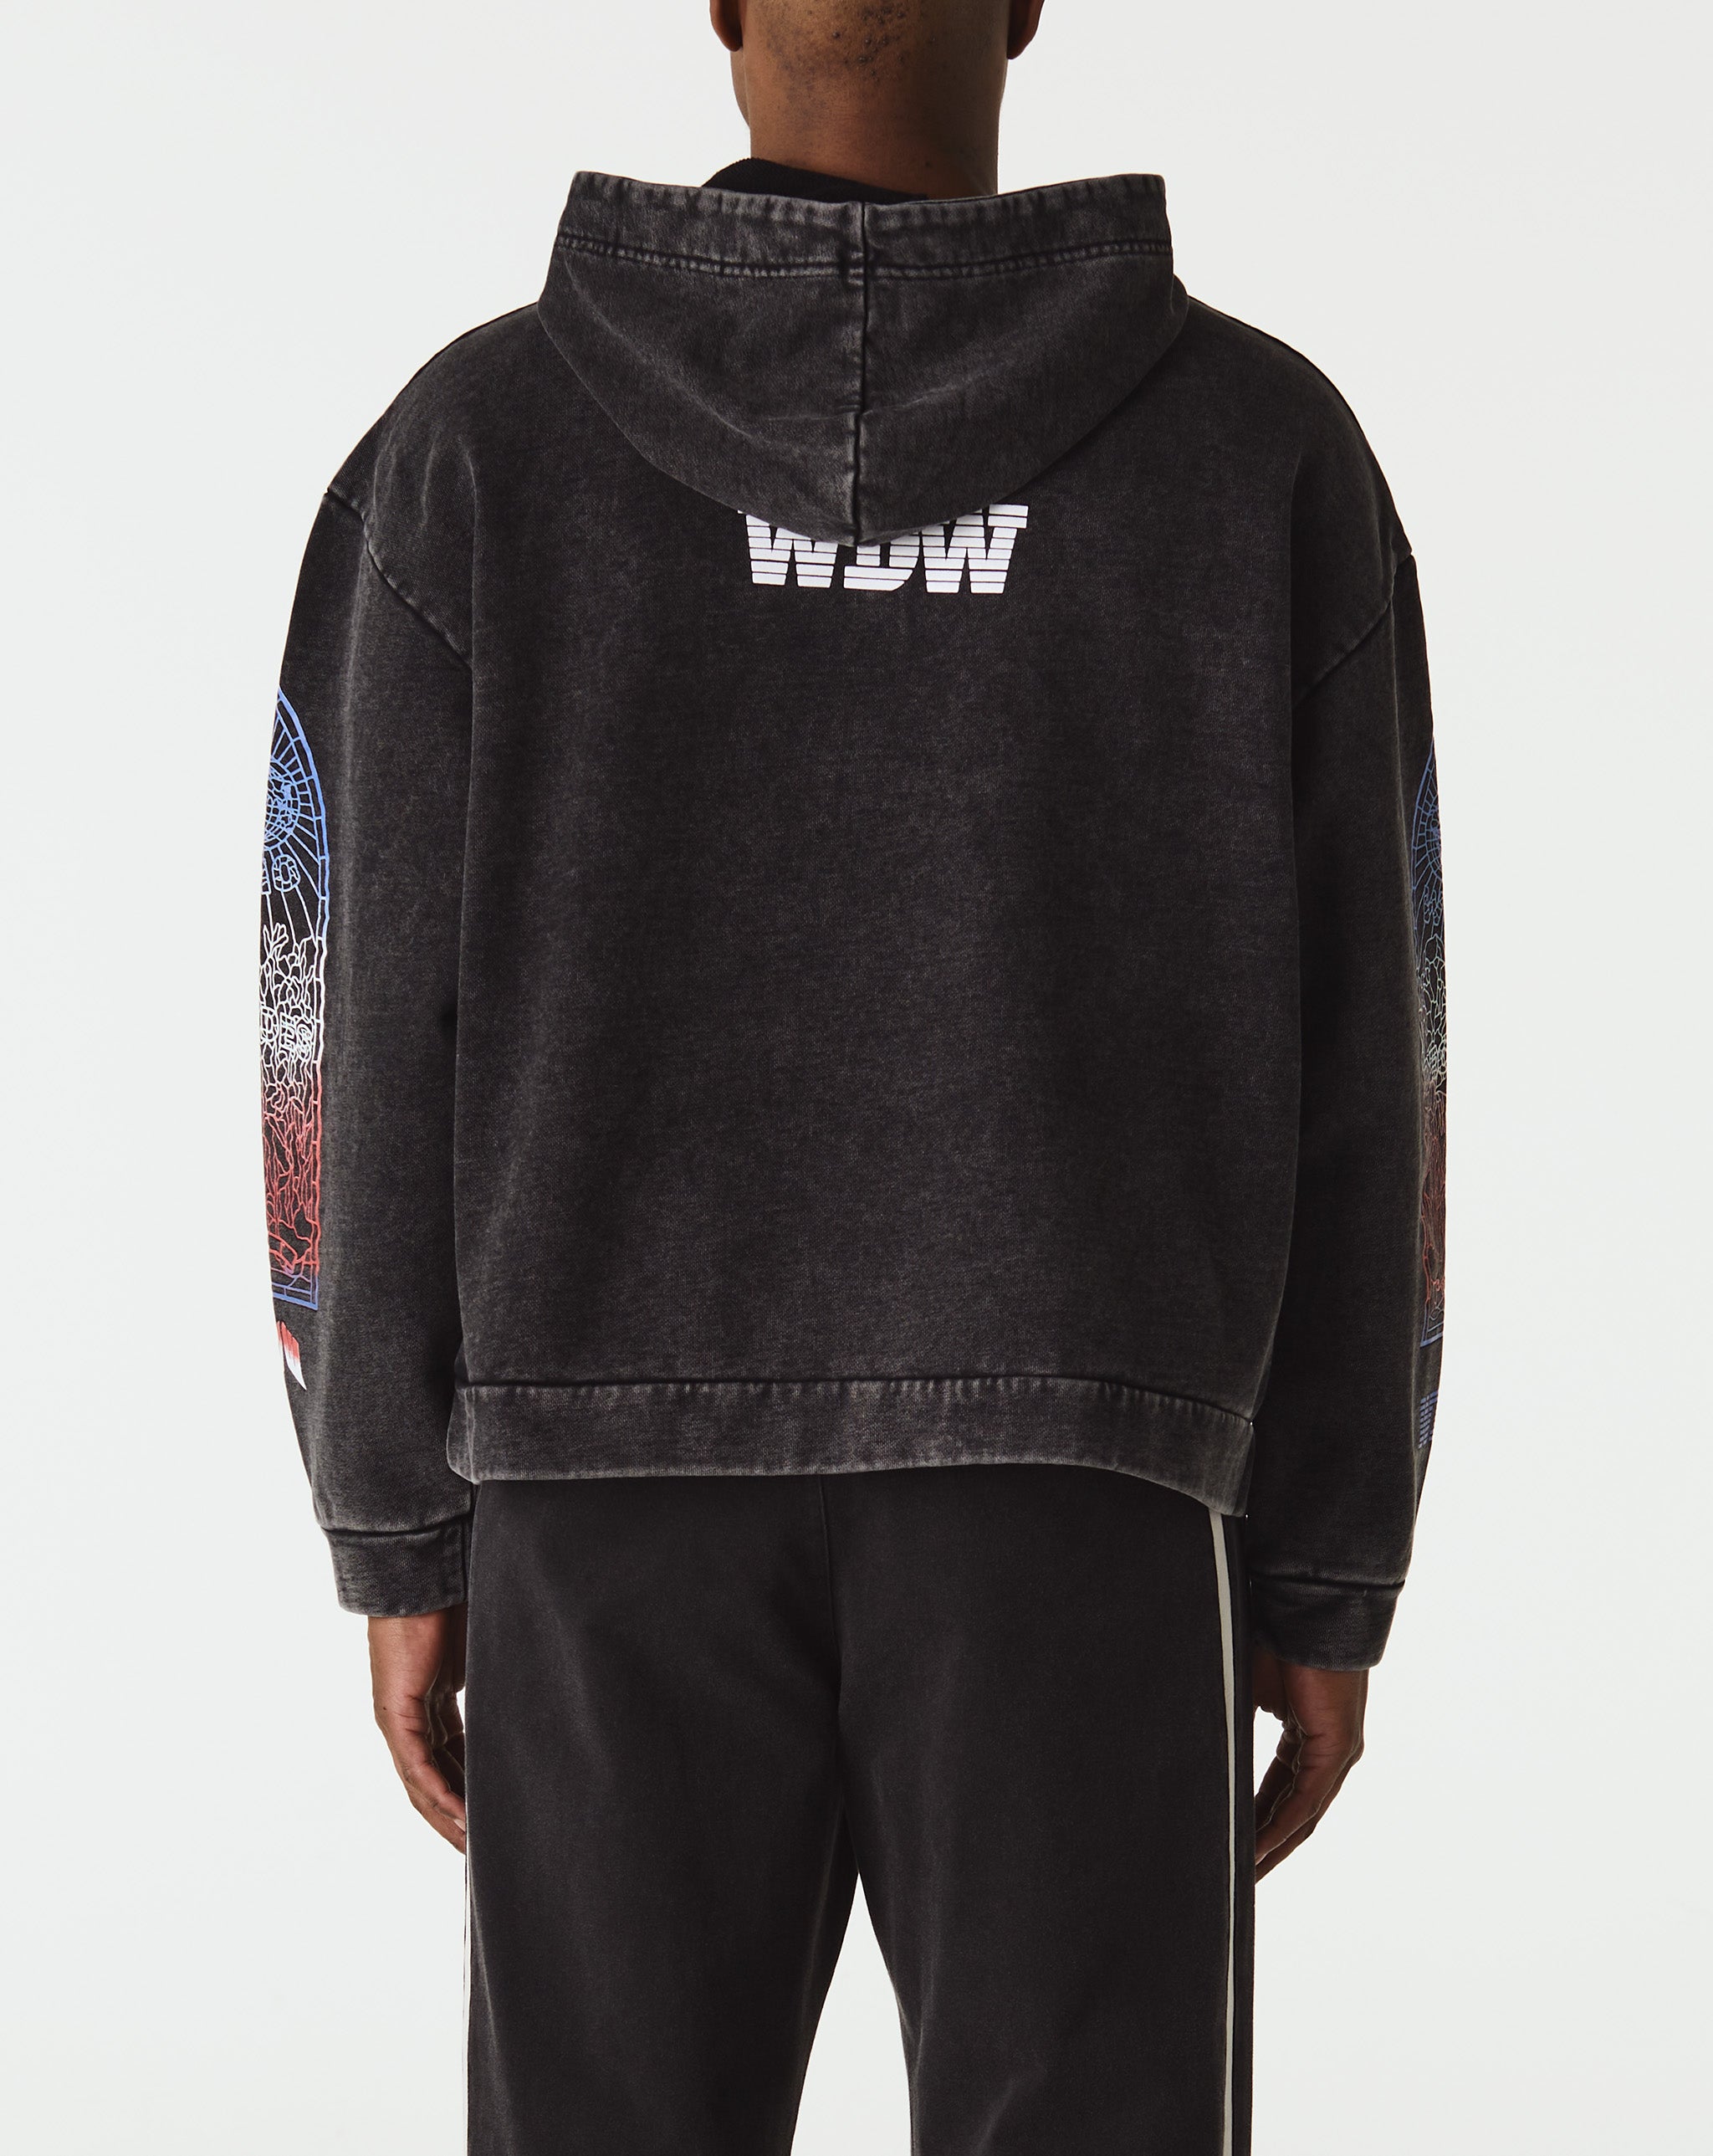 Who Decides War Intertwined Windows Hoodie  - Cheap 127-0 Jordan outlet